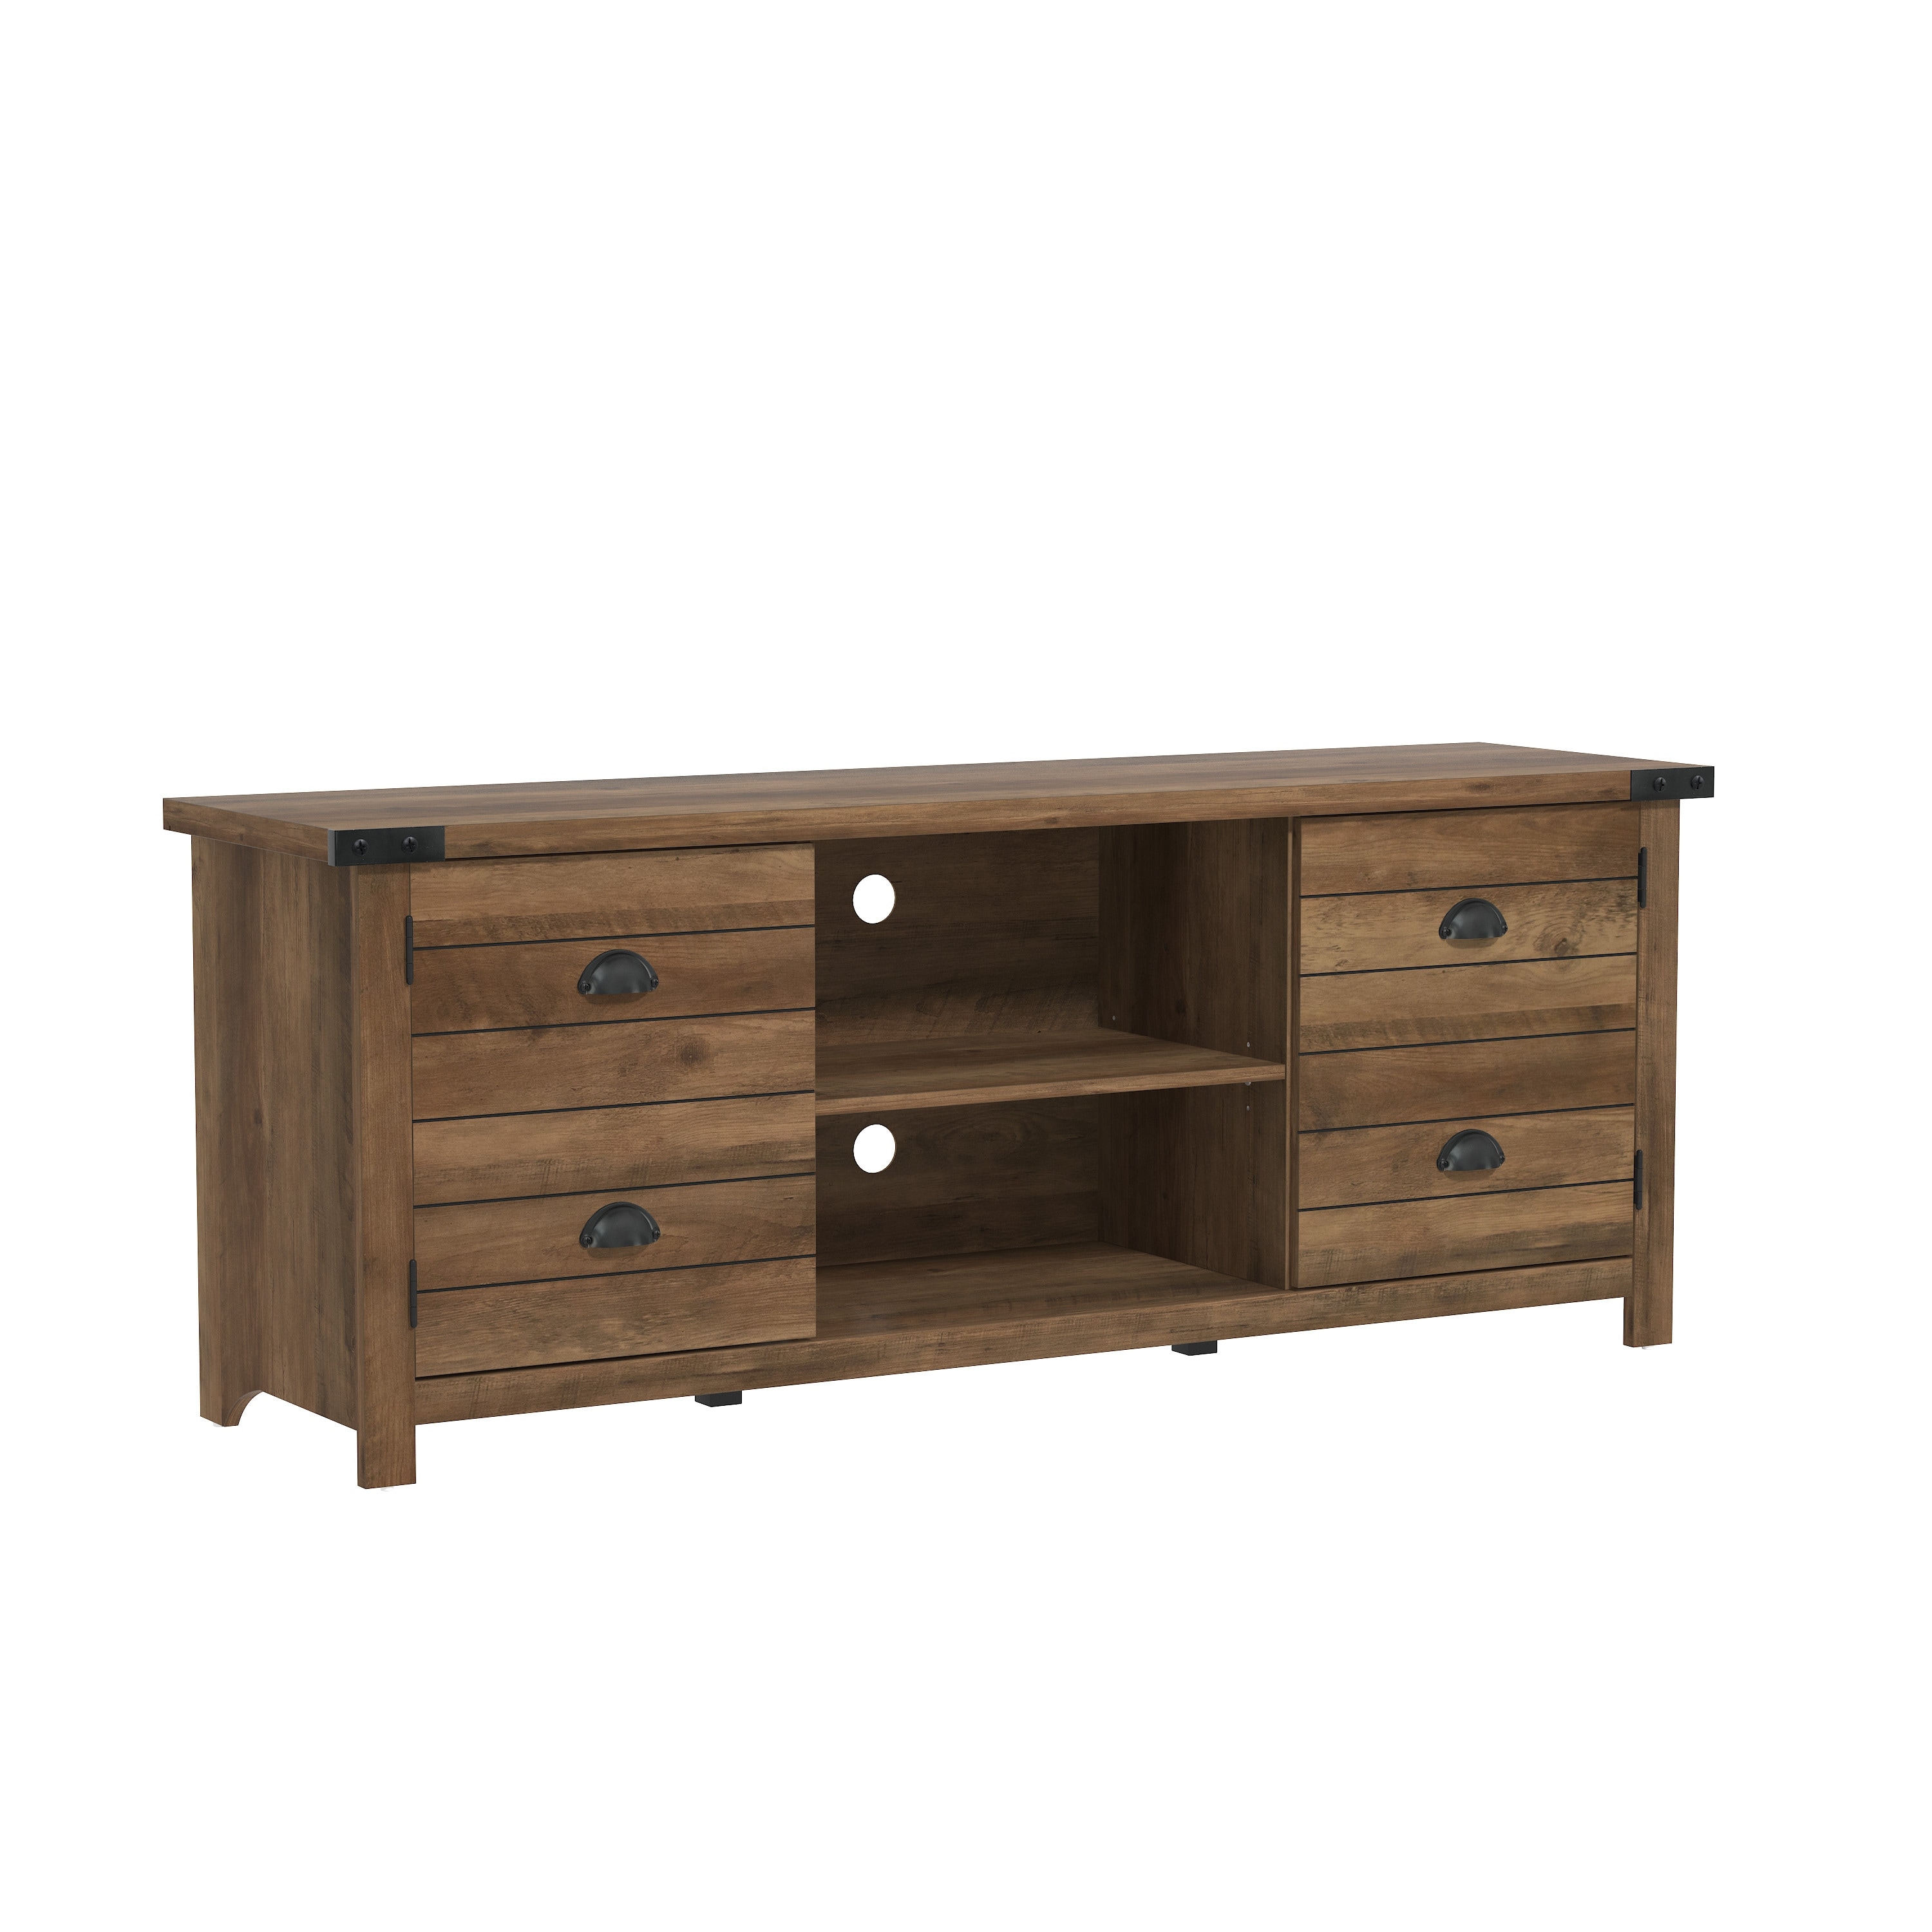 Hillsdale Prestwick Gaming Ready Wood Tv Stand With 2 Doors And Shelves